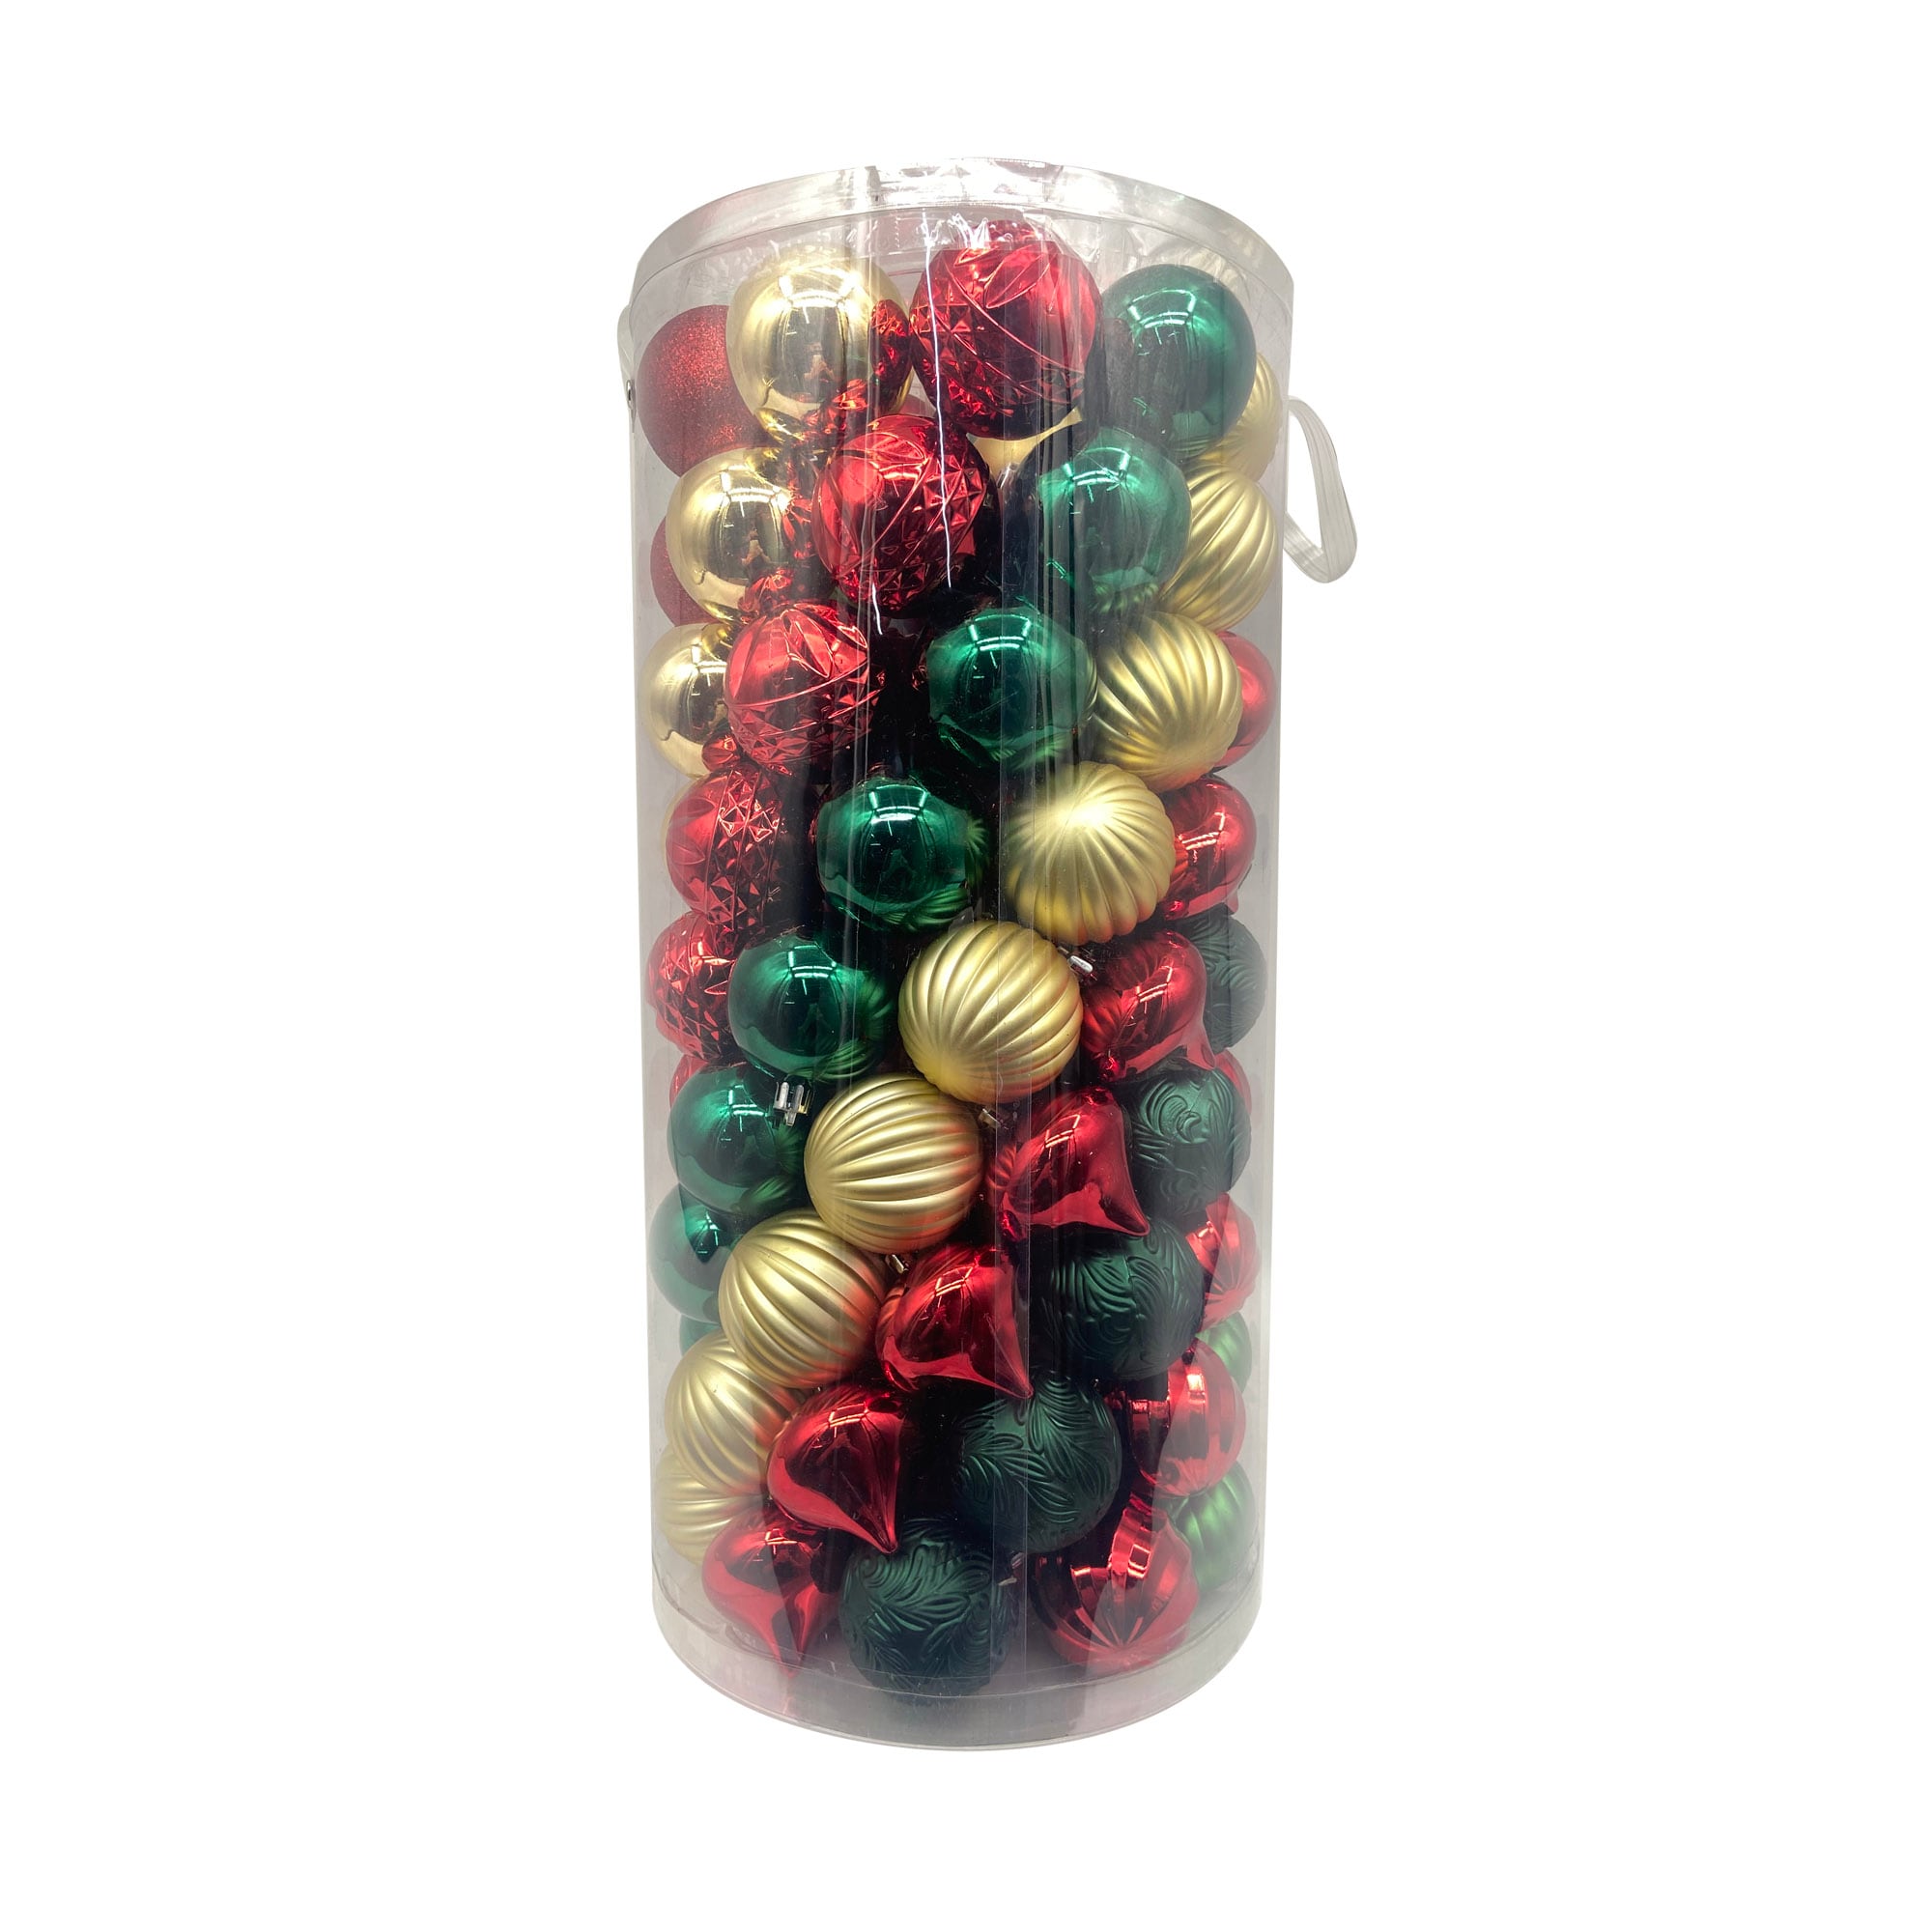 12 Pack Green, Gold and Purple Assorted Ball Ornaments